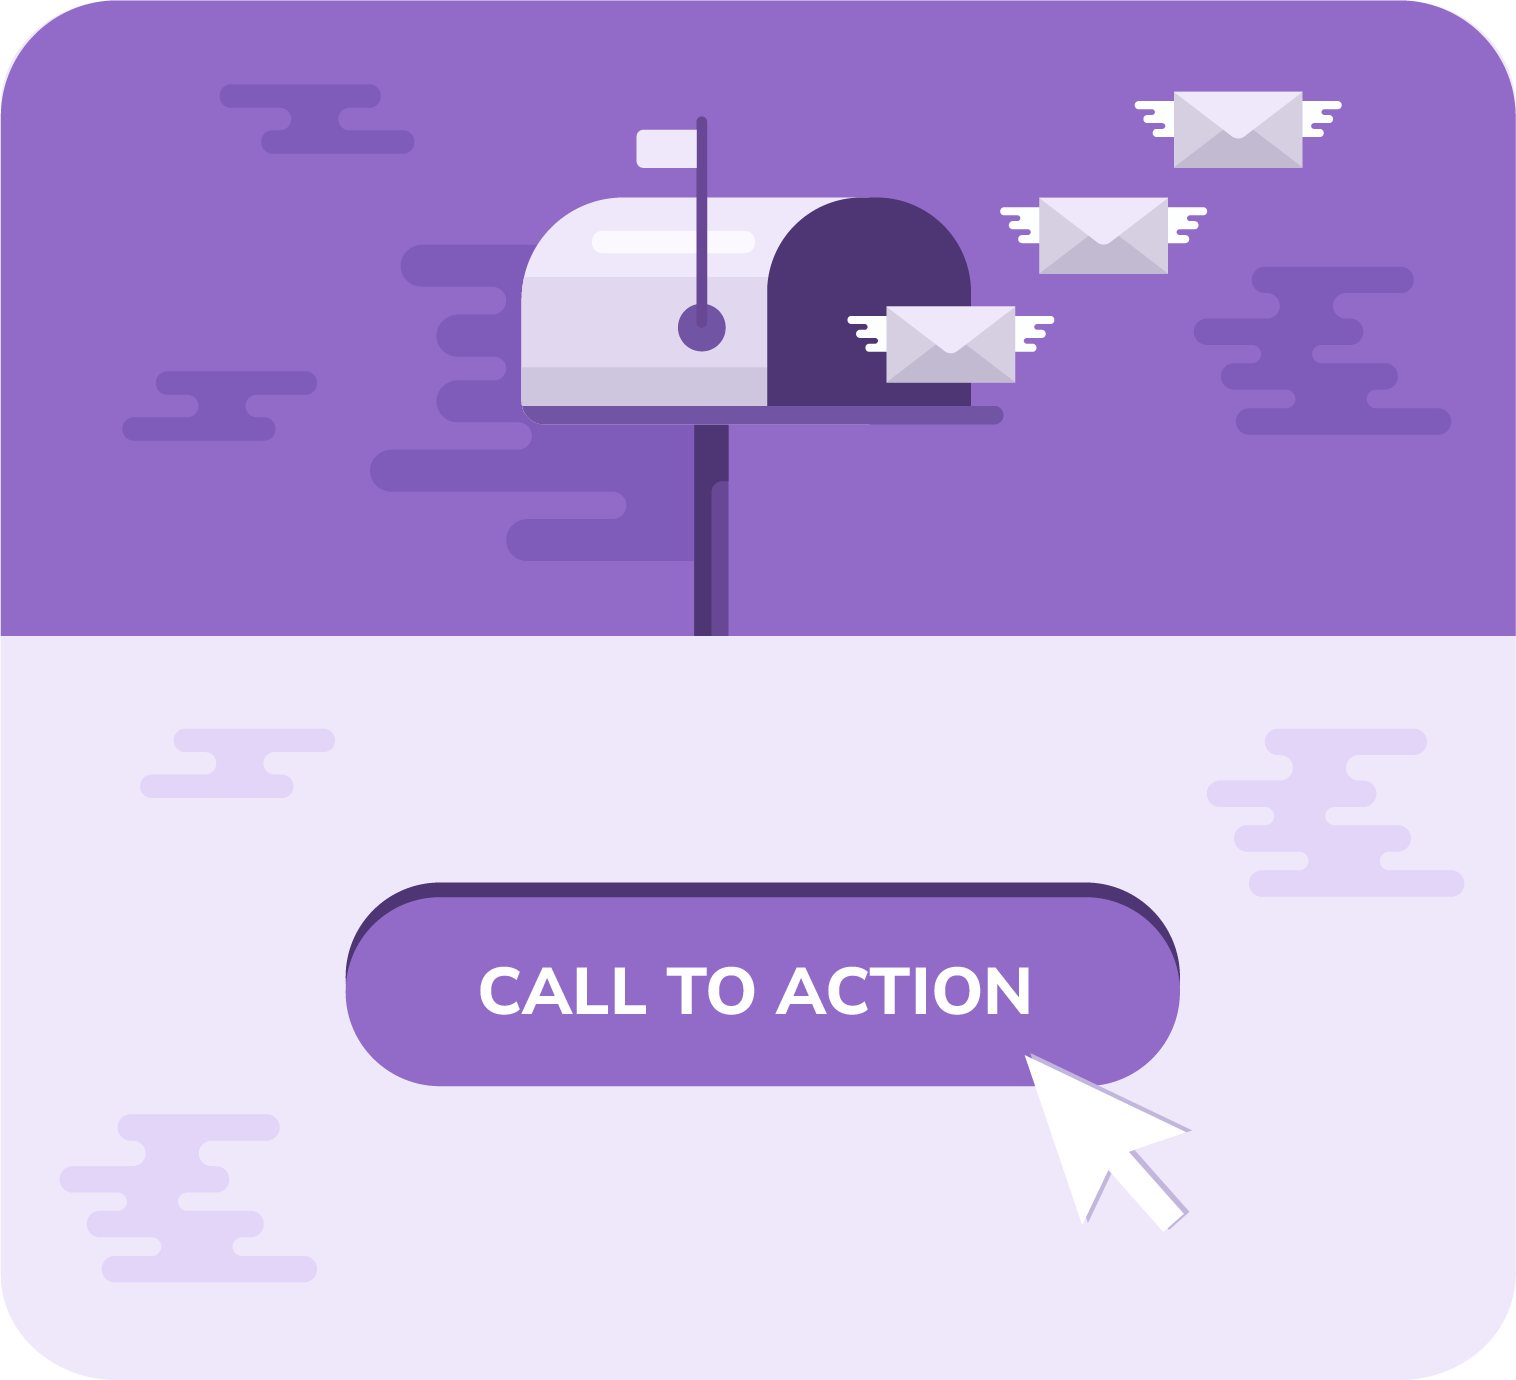 What many transactional emails need is a clear Call-To-Action